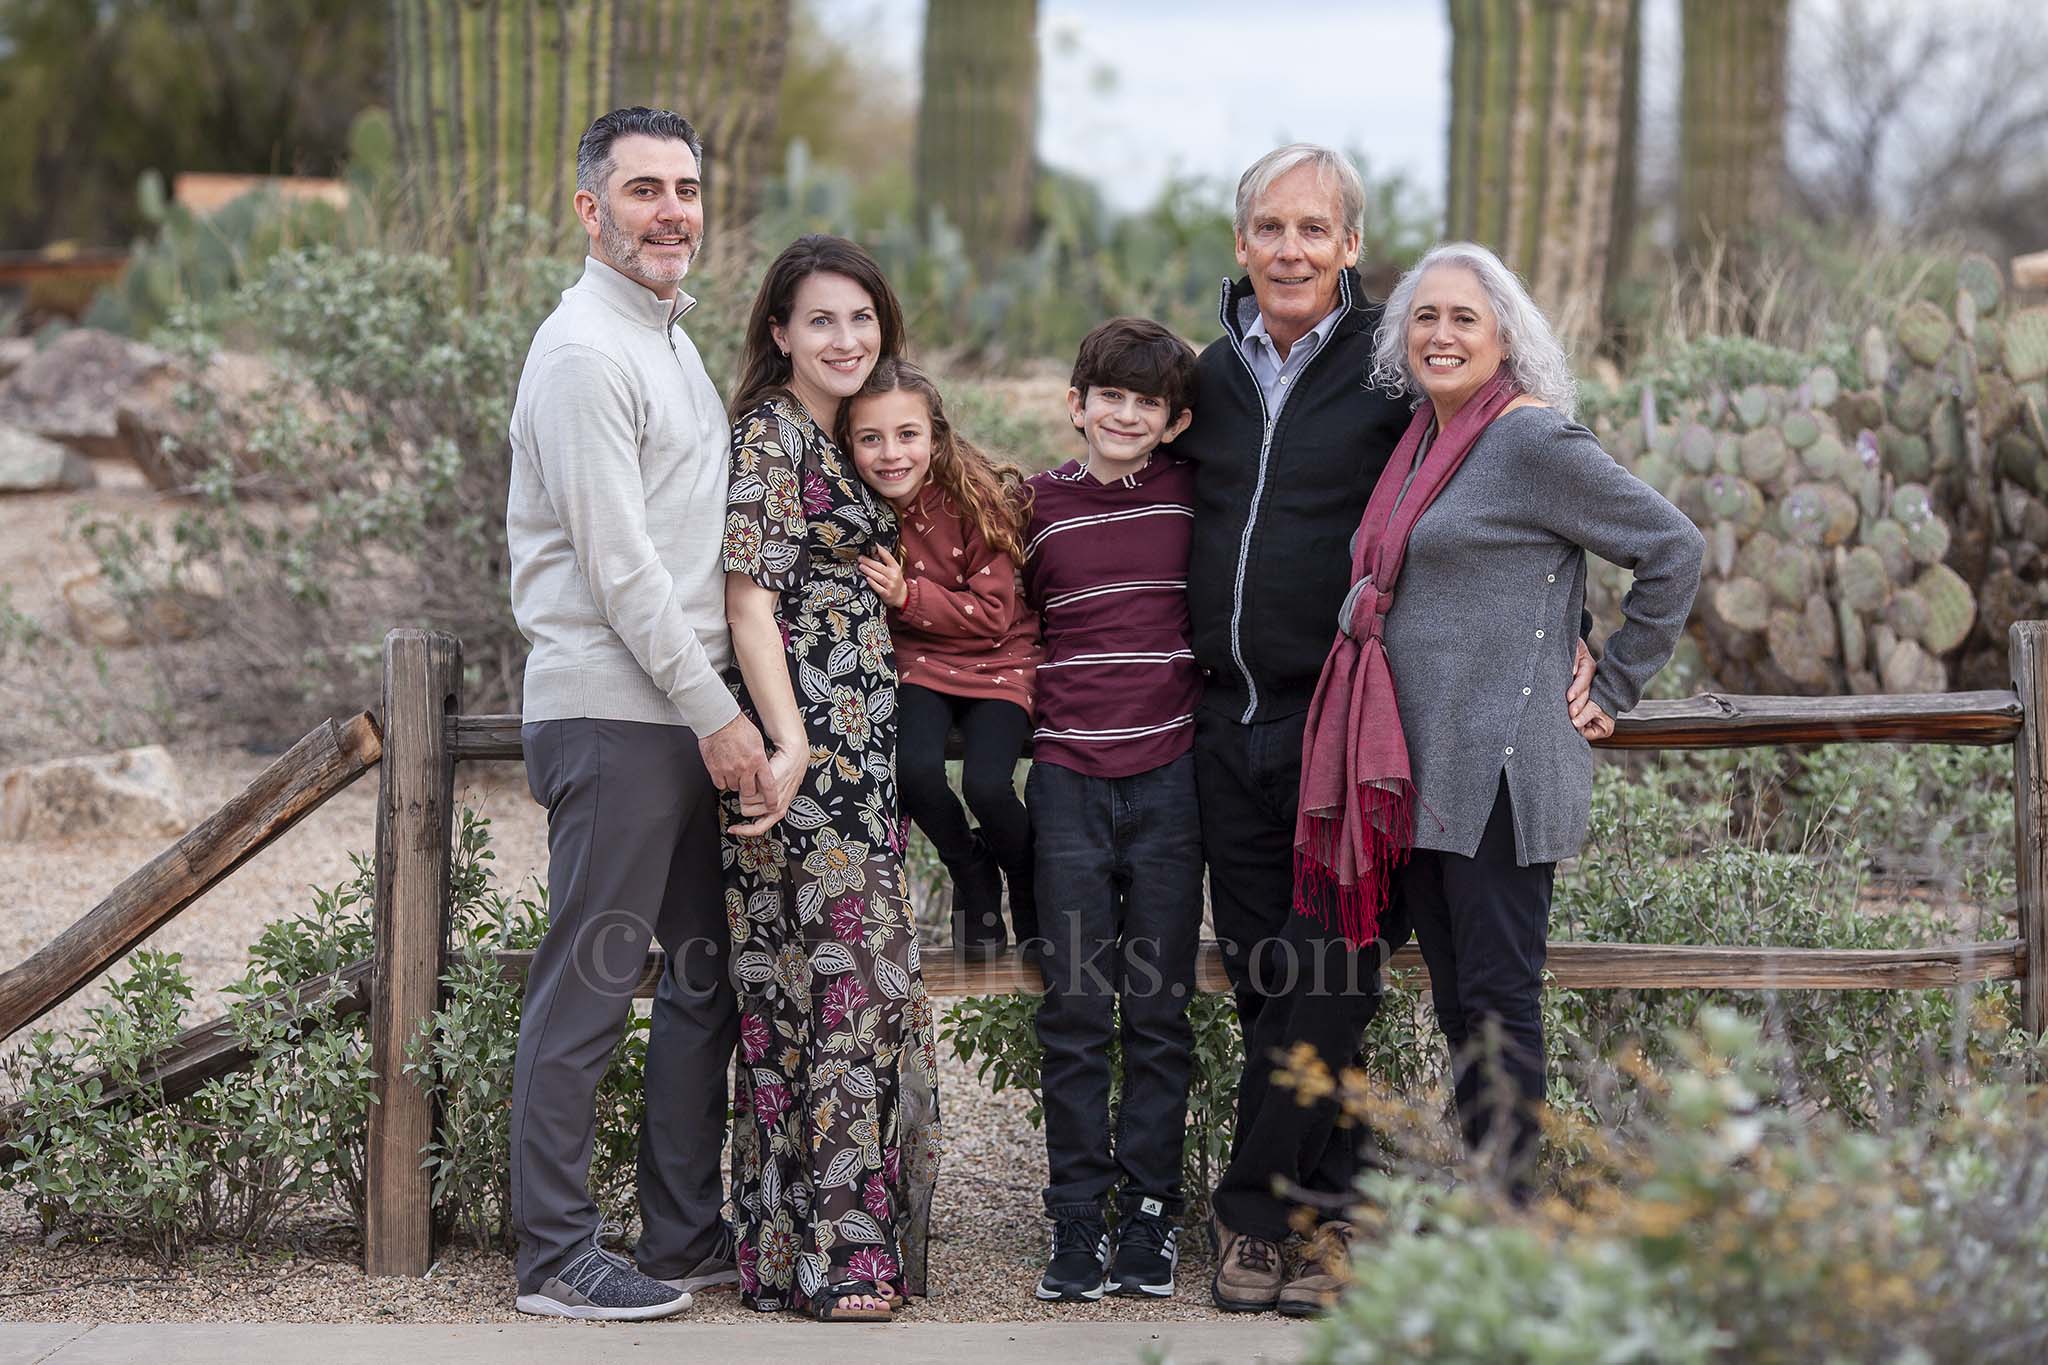 Phoenix Extended family photographer at Gilbert Riparian Preserve.  One of the top rated [photographers in Phoenix